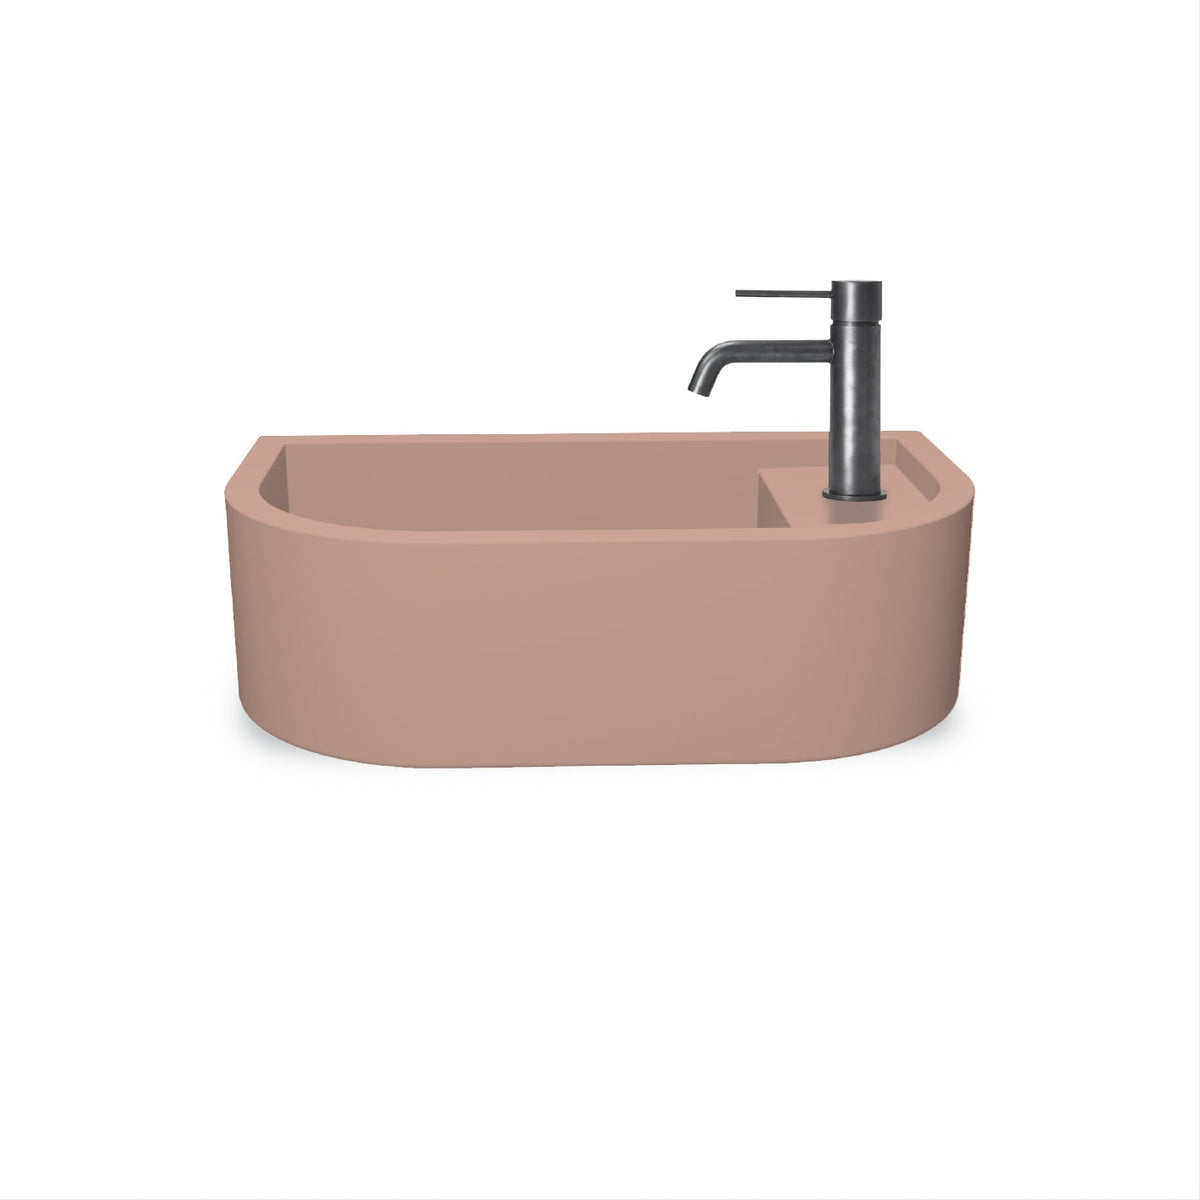 Loop 01 Basin - Overflow - Surface Mount (Blush Pink,Tap Hole,Brass)